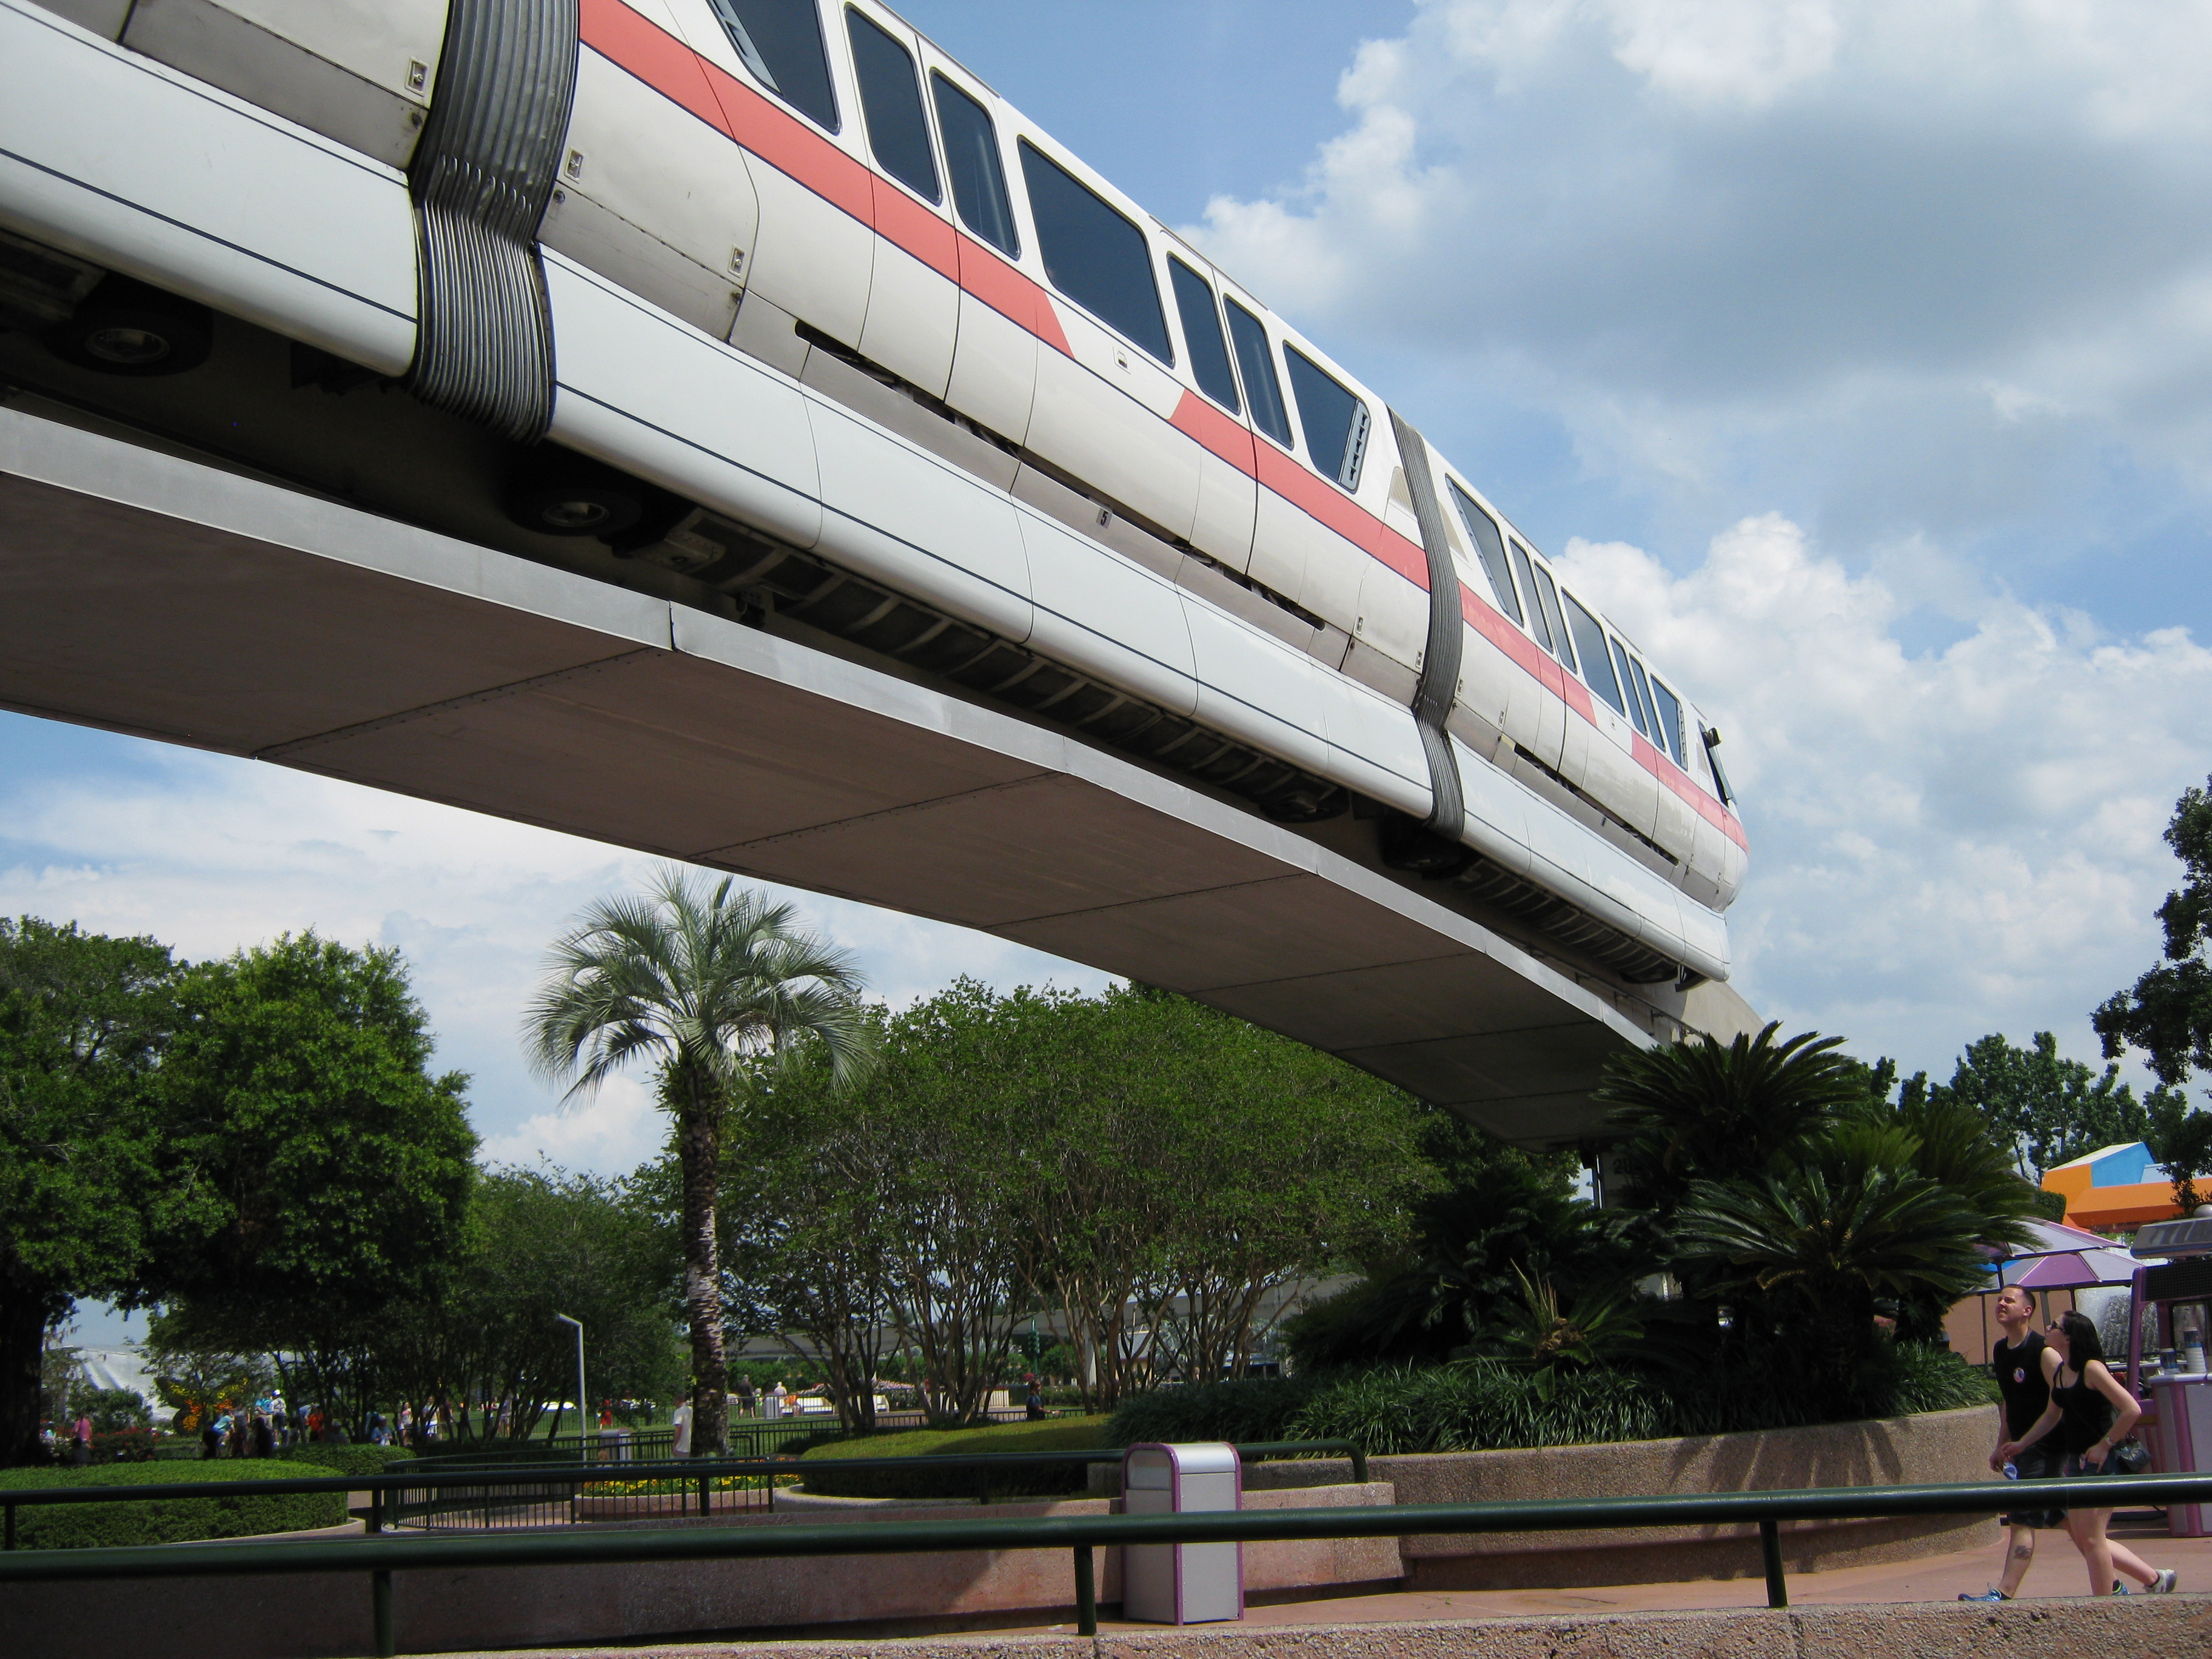 How Do I Get There? Tips for Transportation While Staying at Walt Disney World